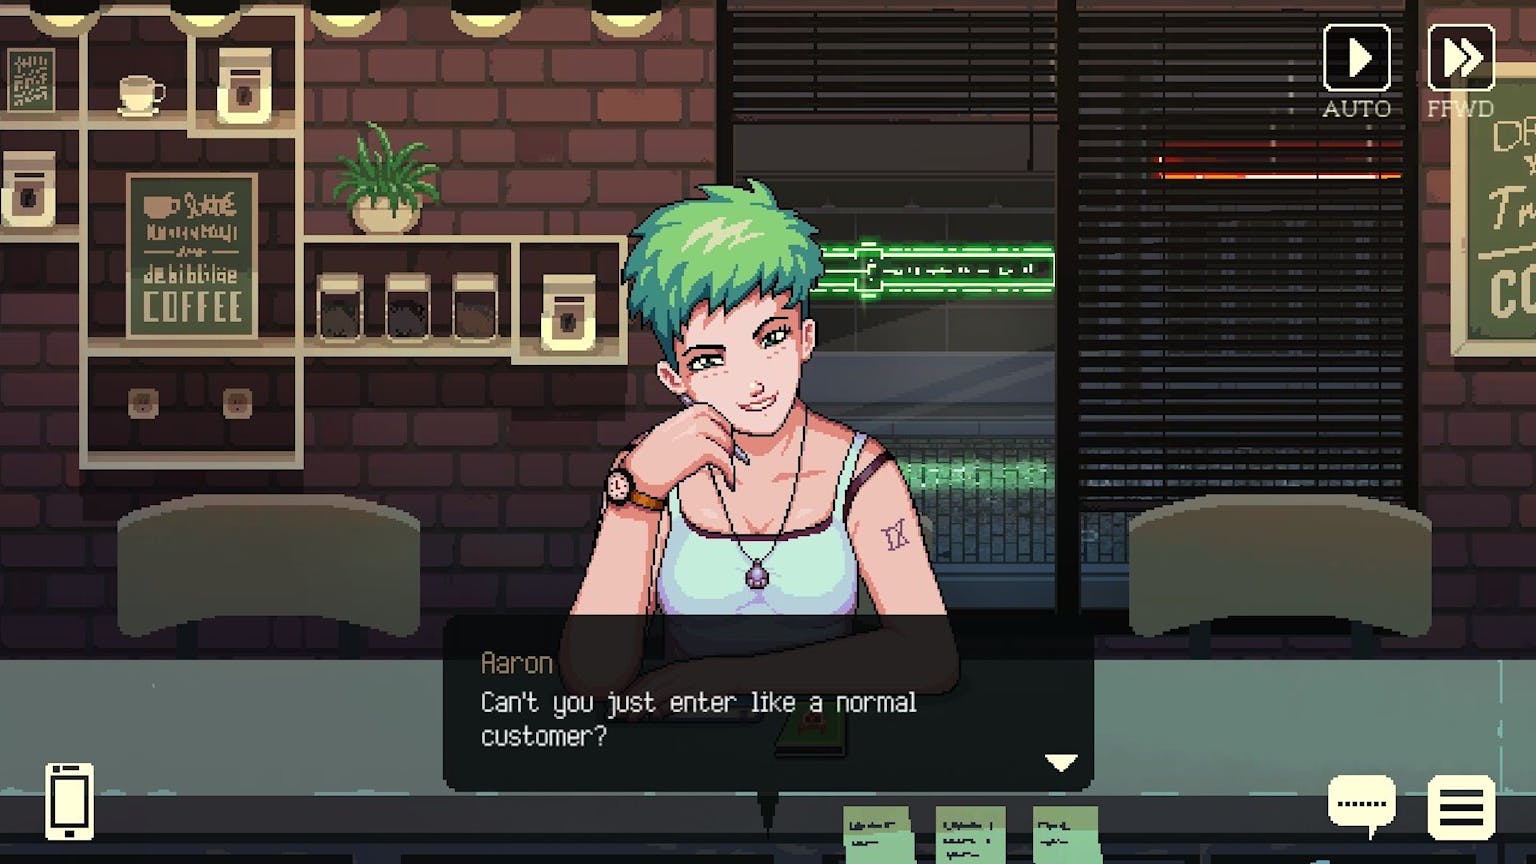 Conversation with a customer, a tattooed woman with green hair. The player asks, "Can't you just enter like a normal customer?"